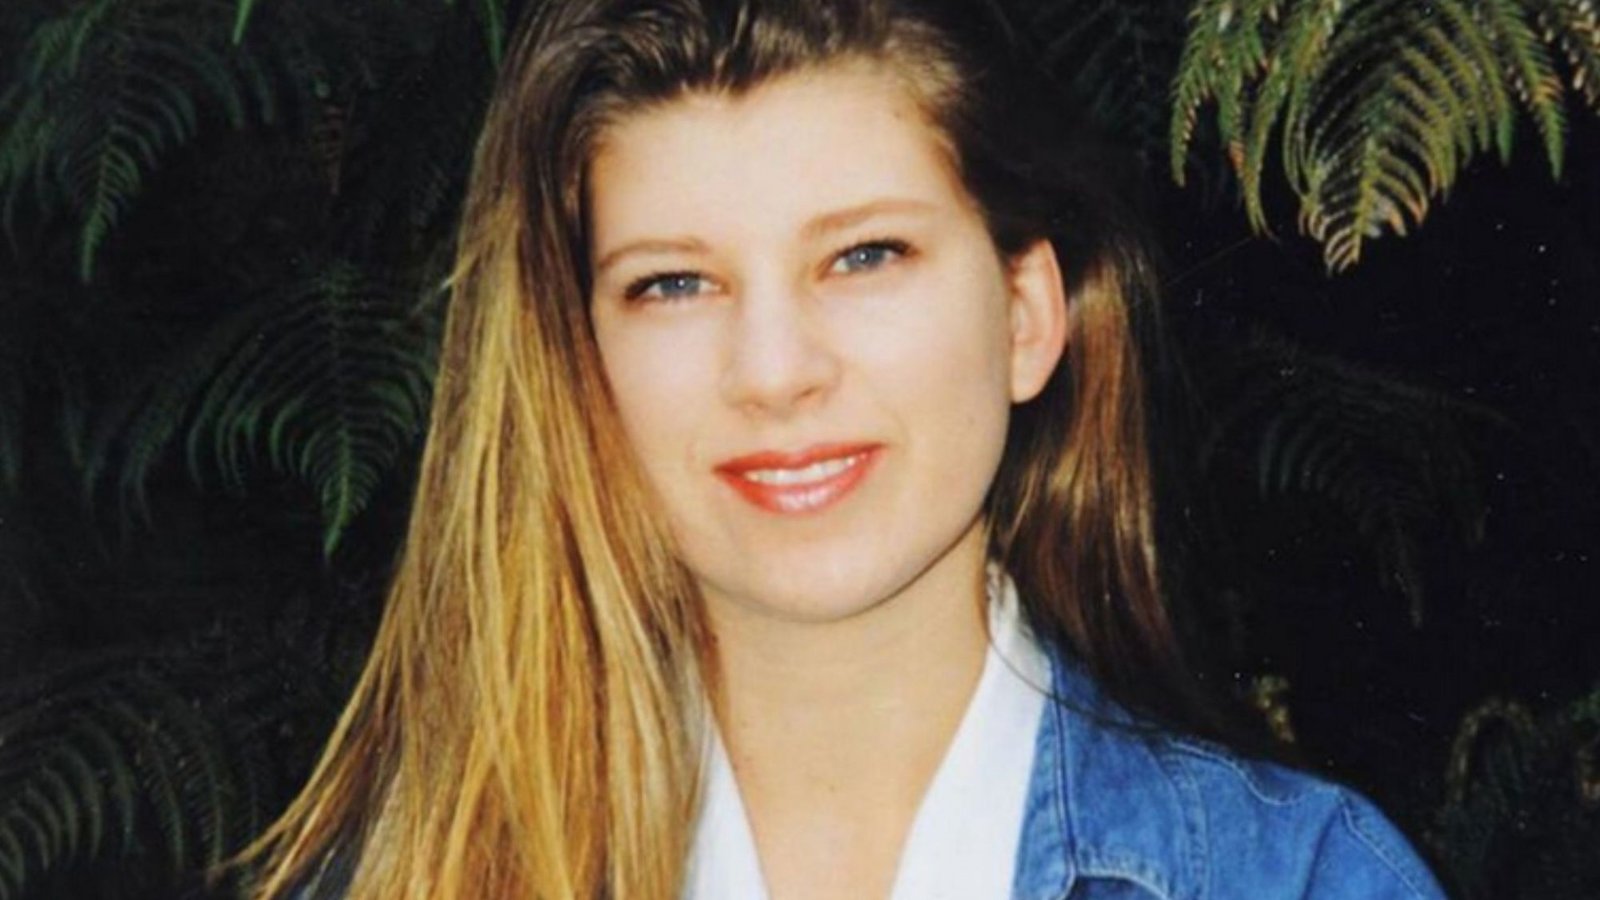 Bombshell cold case breakthrough as remains of missing backpacker 24 found 23 years after vanishing from hostel